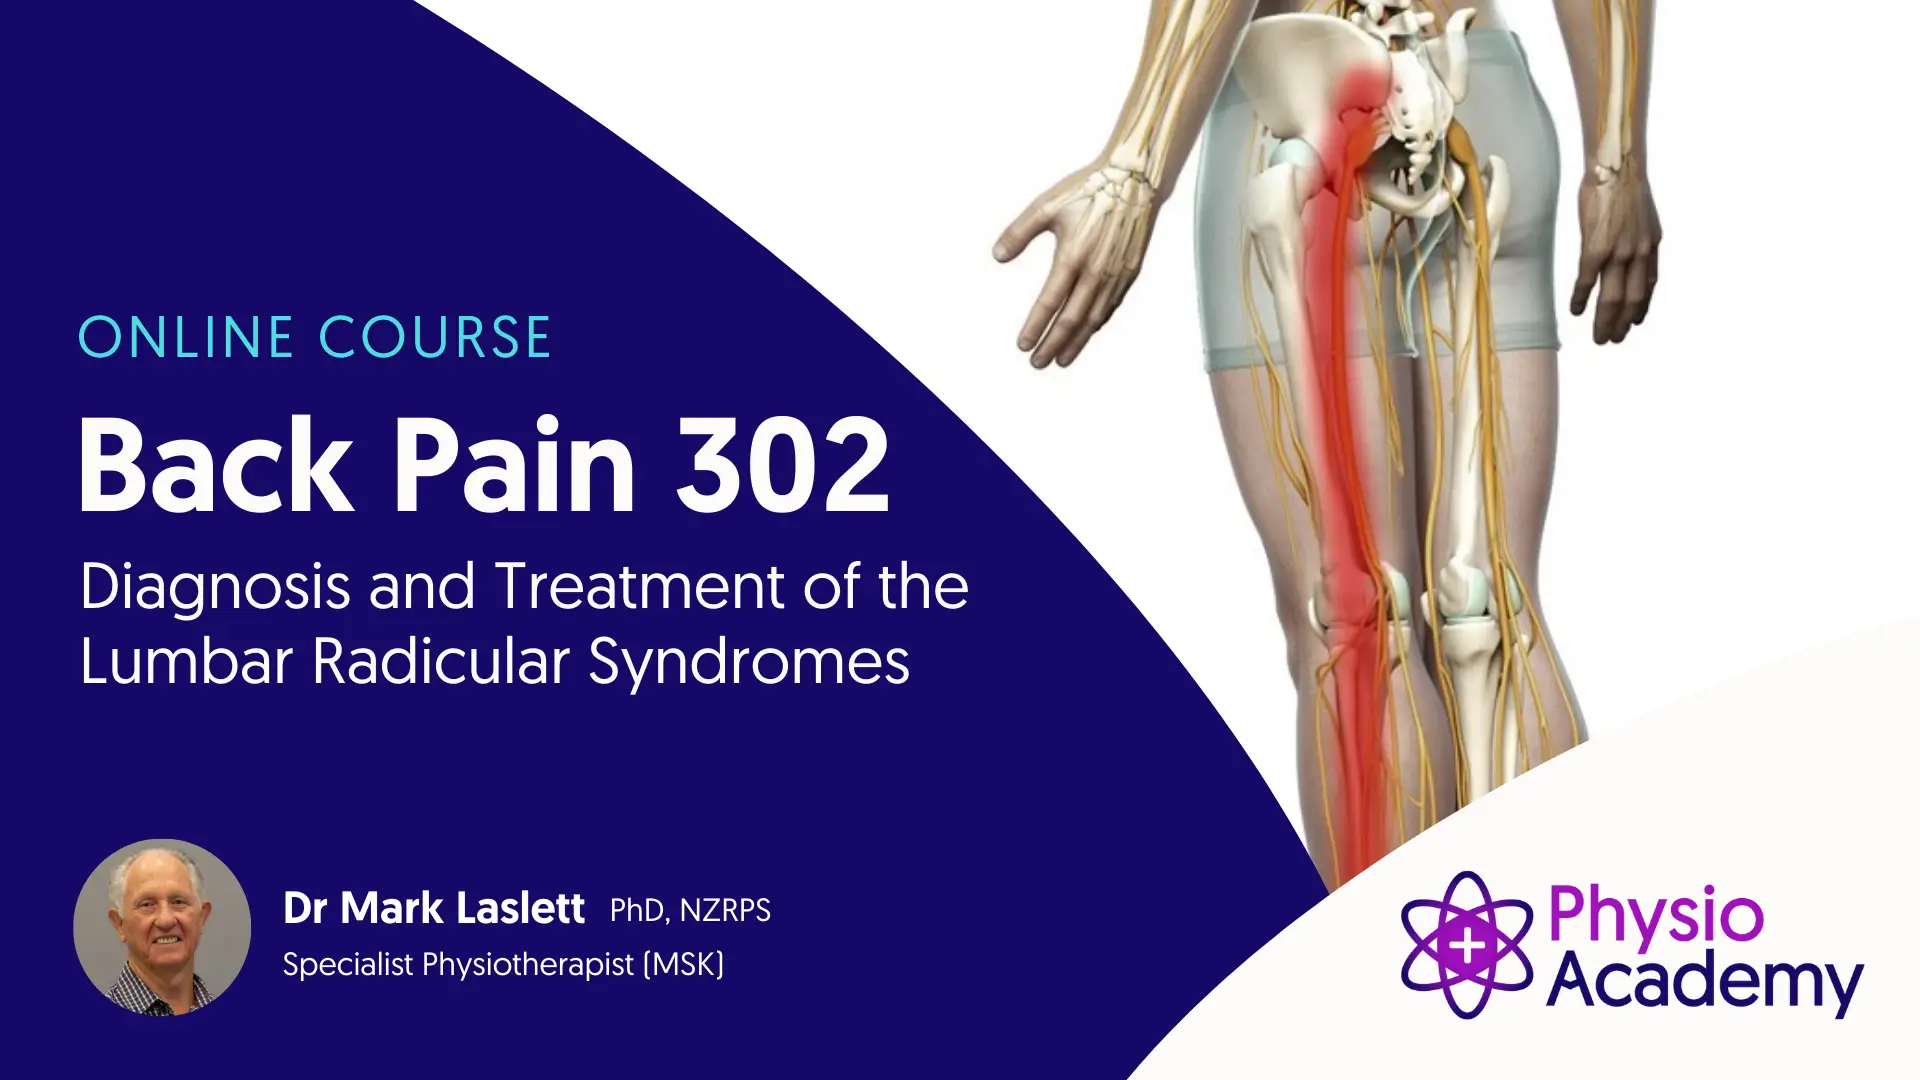 Cover for Back Pain 302 physiotherapy course